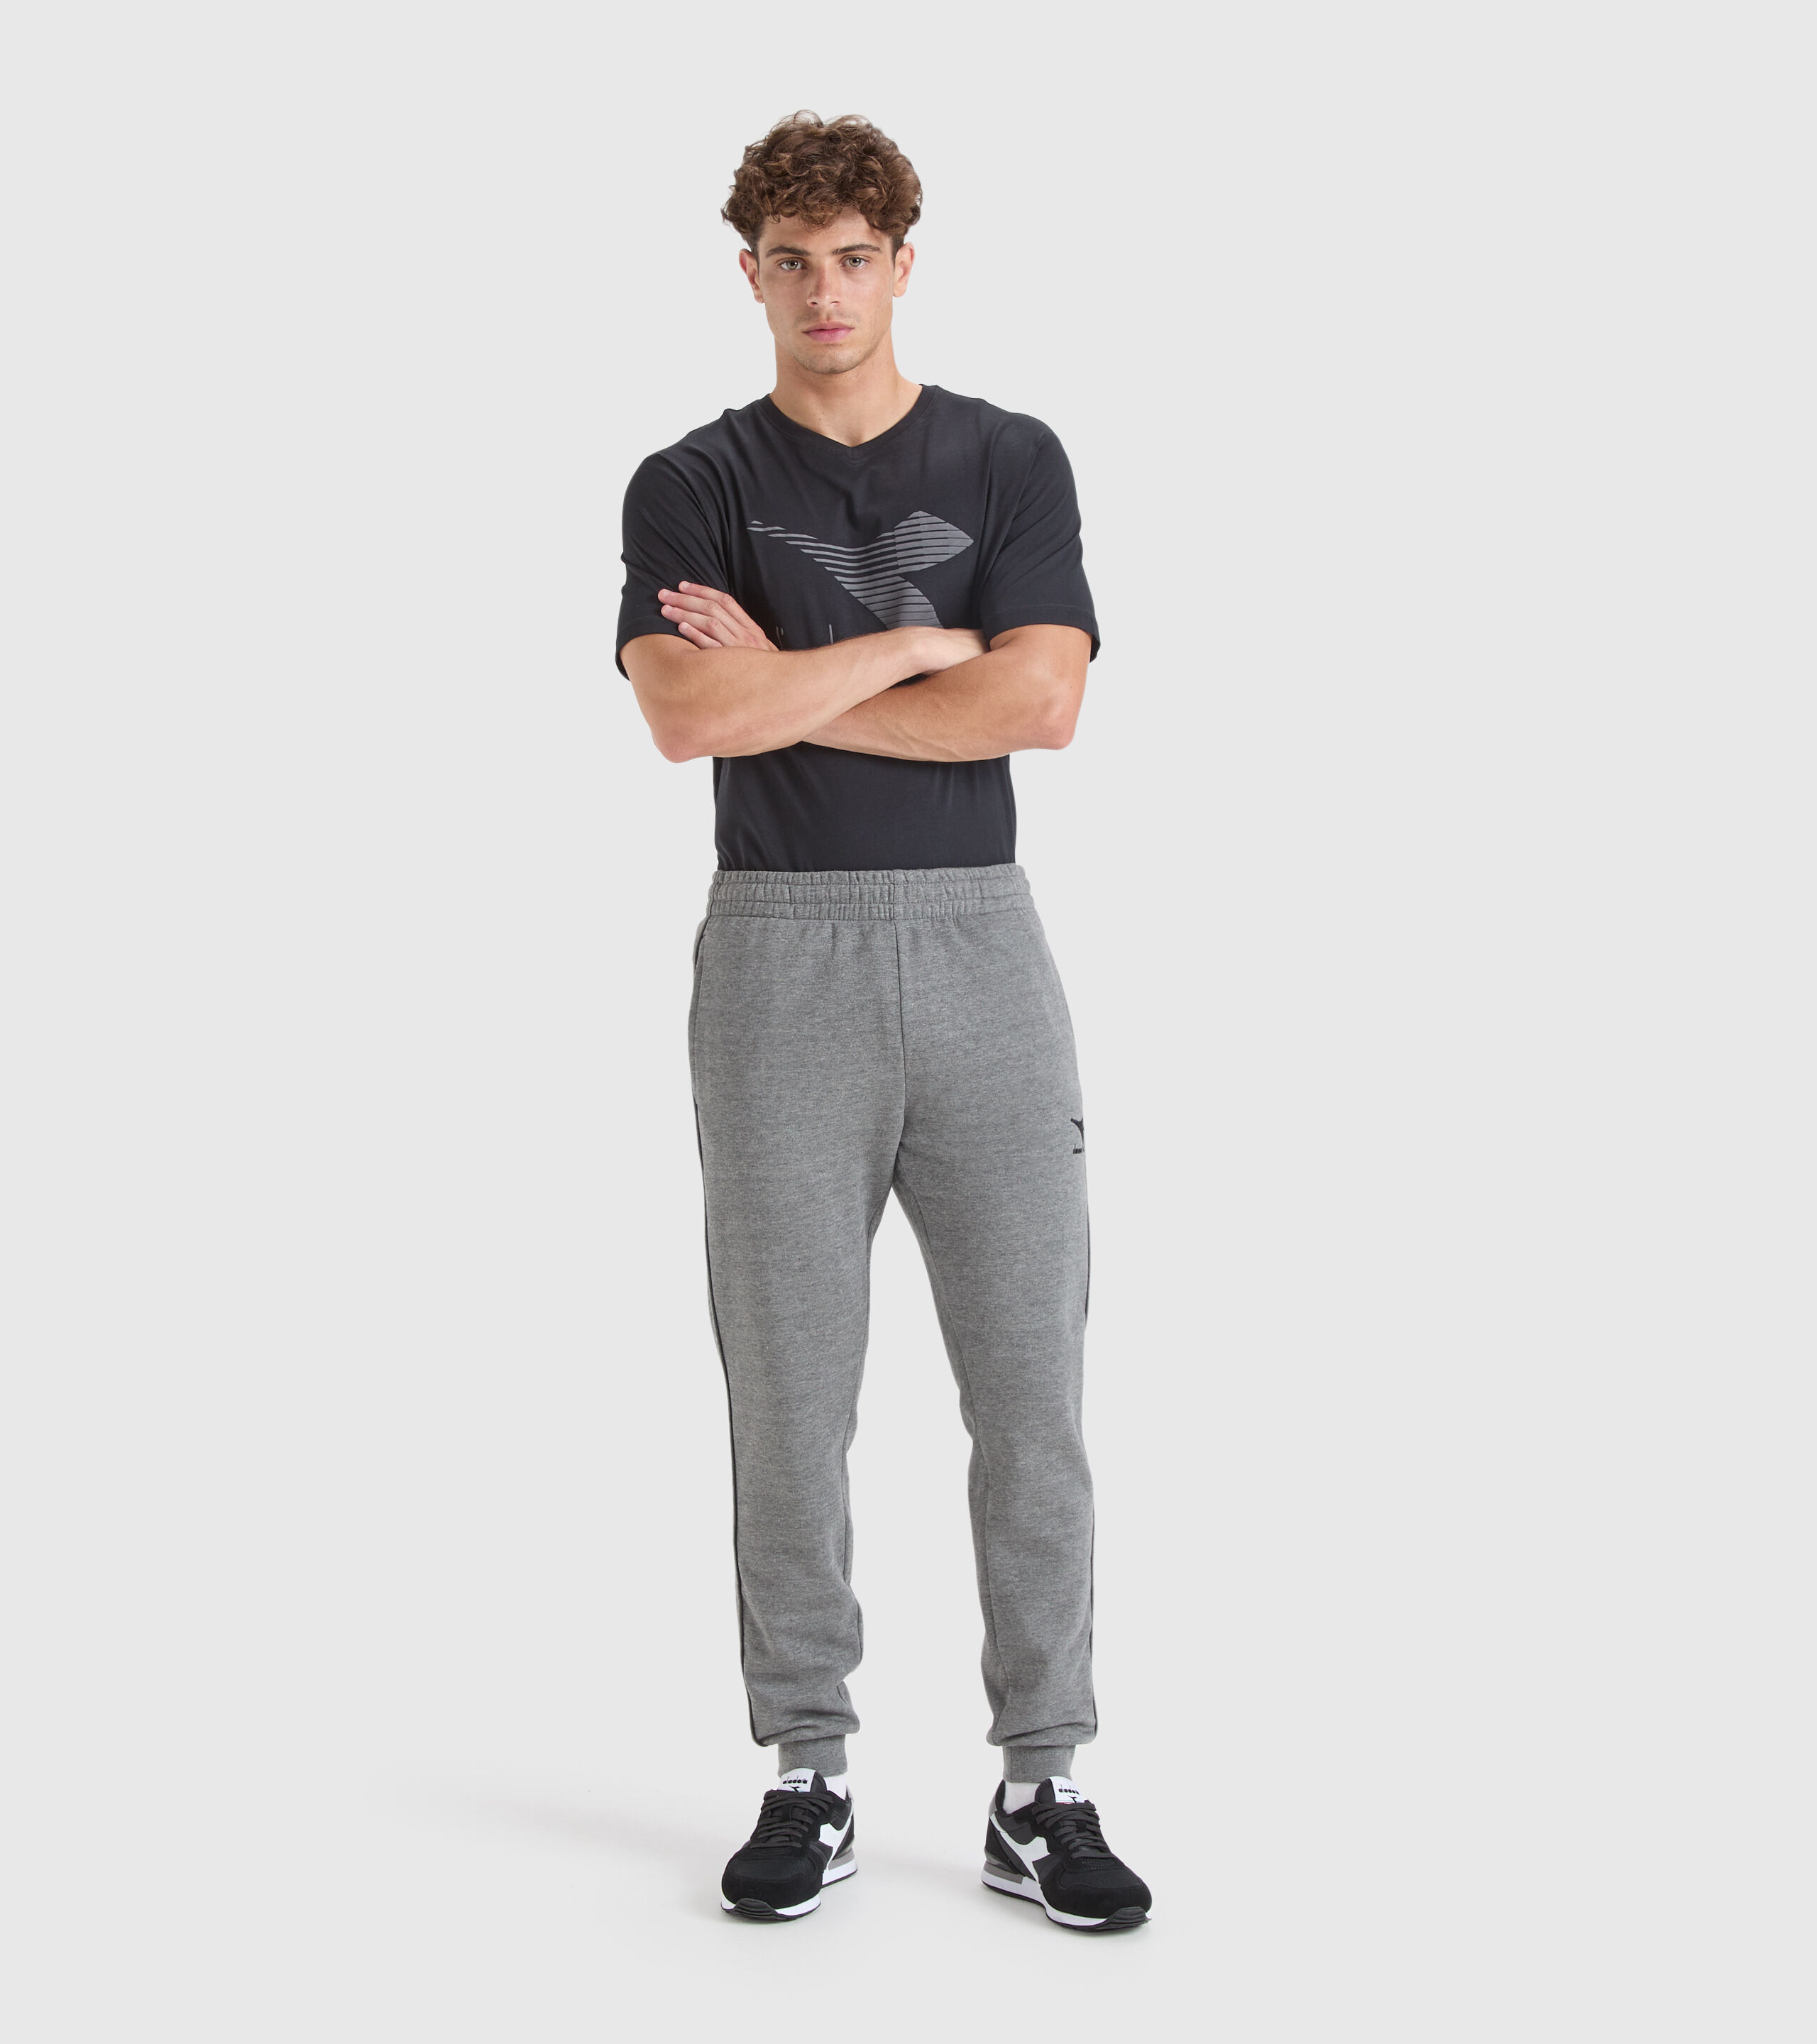 Buy cfzsyyw Mens Wash Casual Workout Pants Outdoor Sports Trousers 1 L at  Amazonin